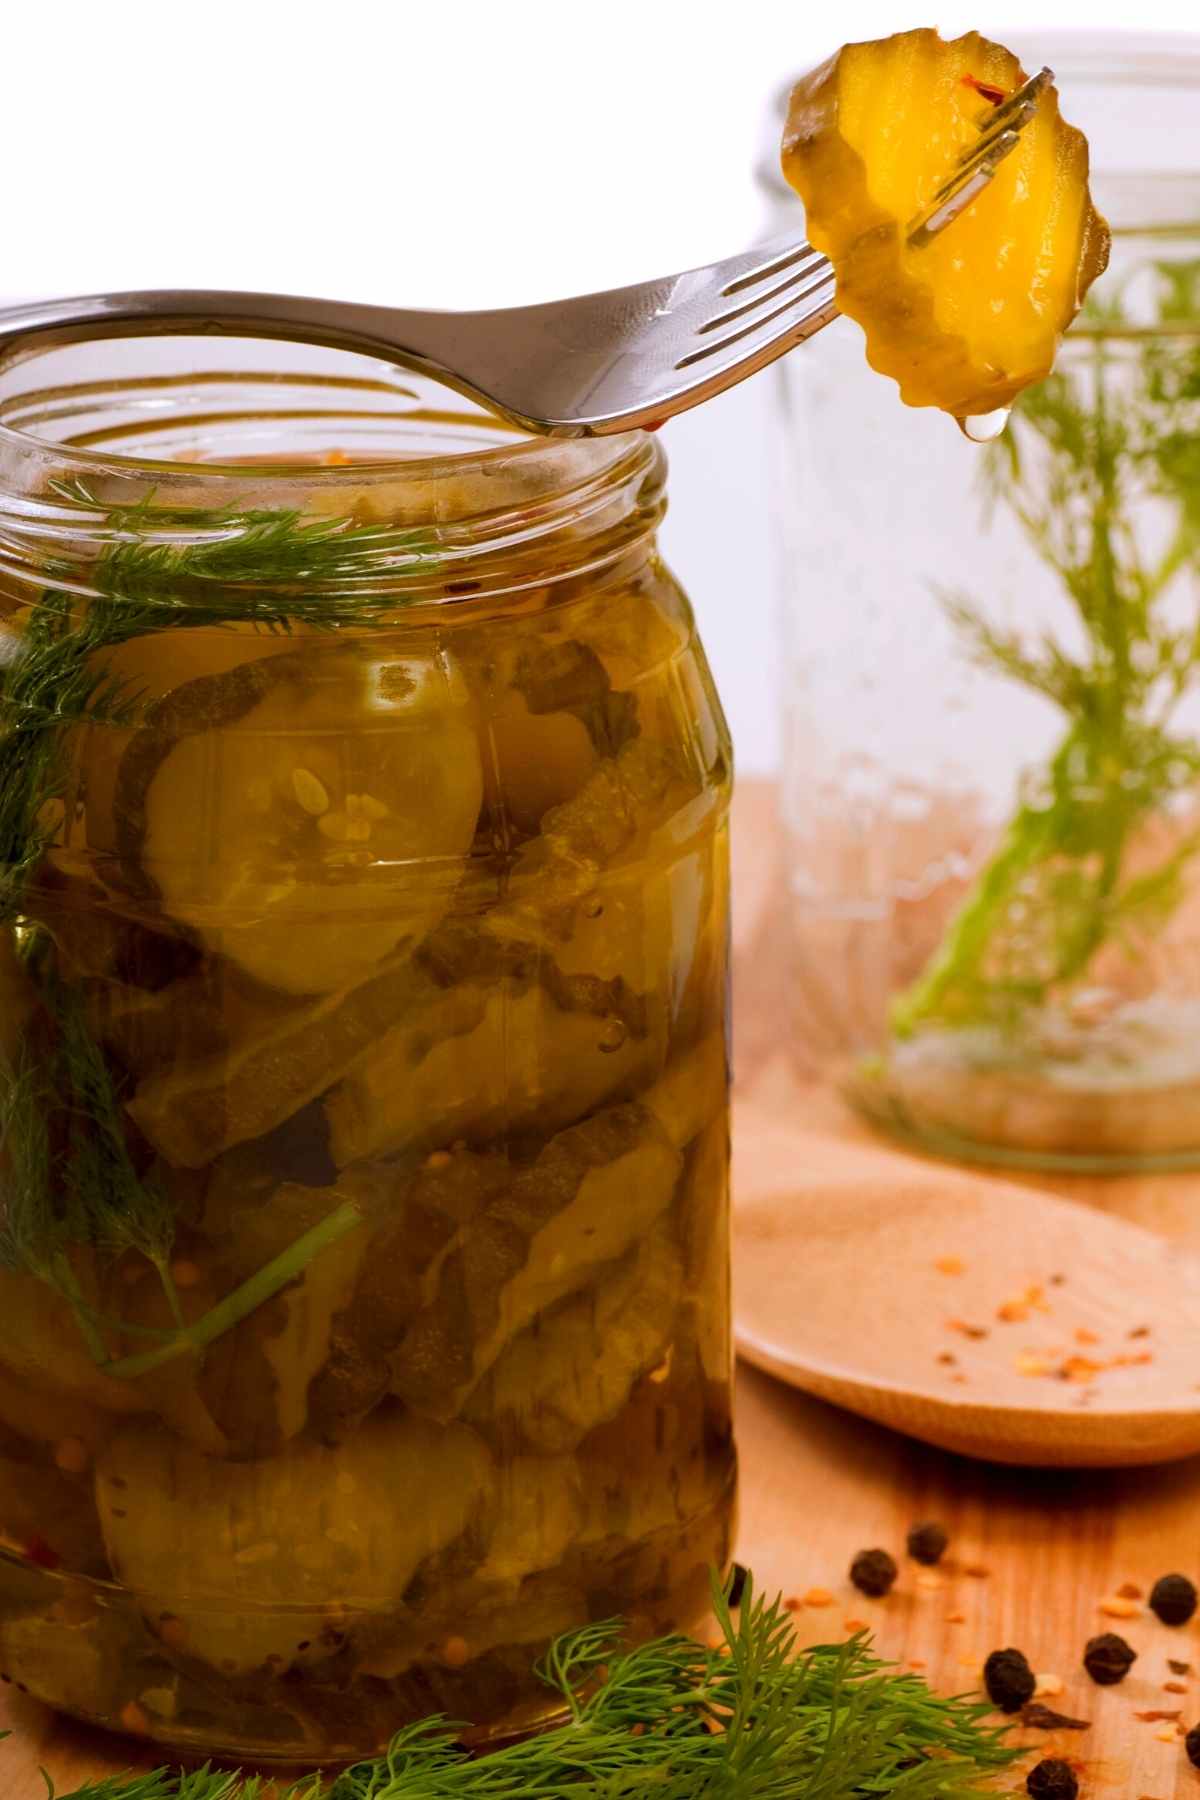 Your taste buds will be dancing when you try these sweet, tangy, and crunchy Candied Pickles. They’re super easy to make, and your family will love them.